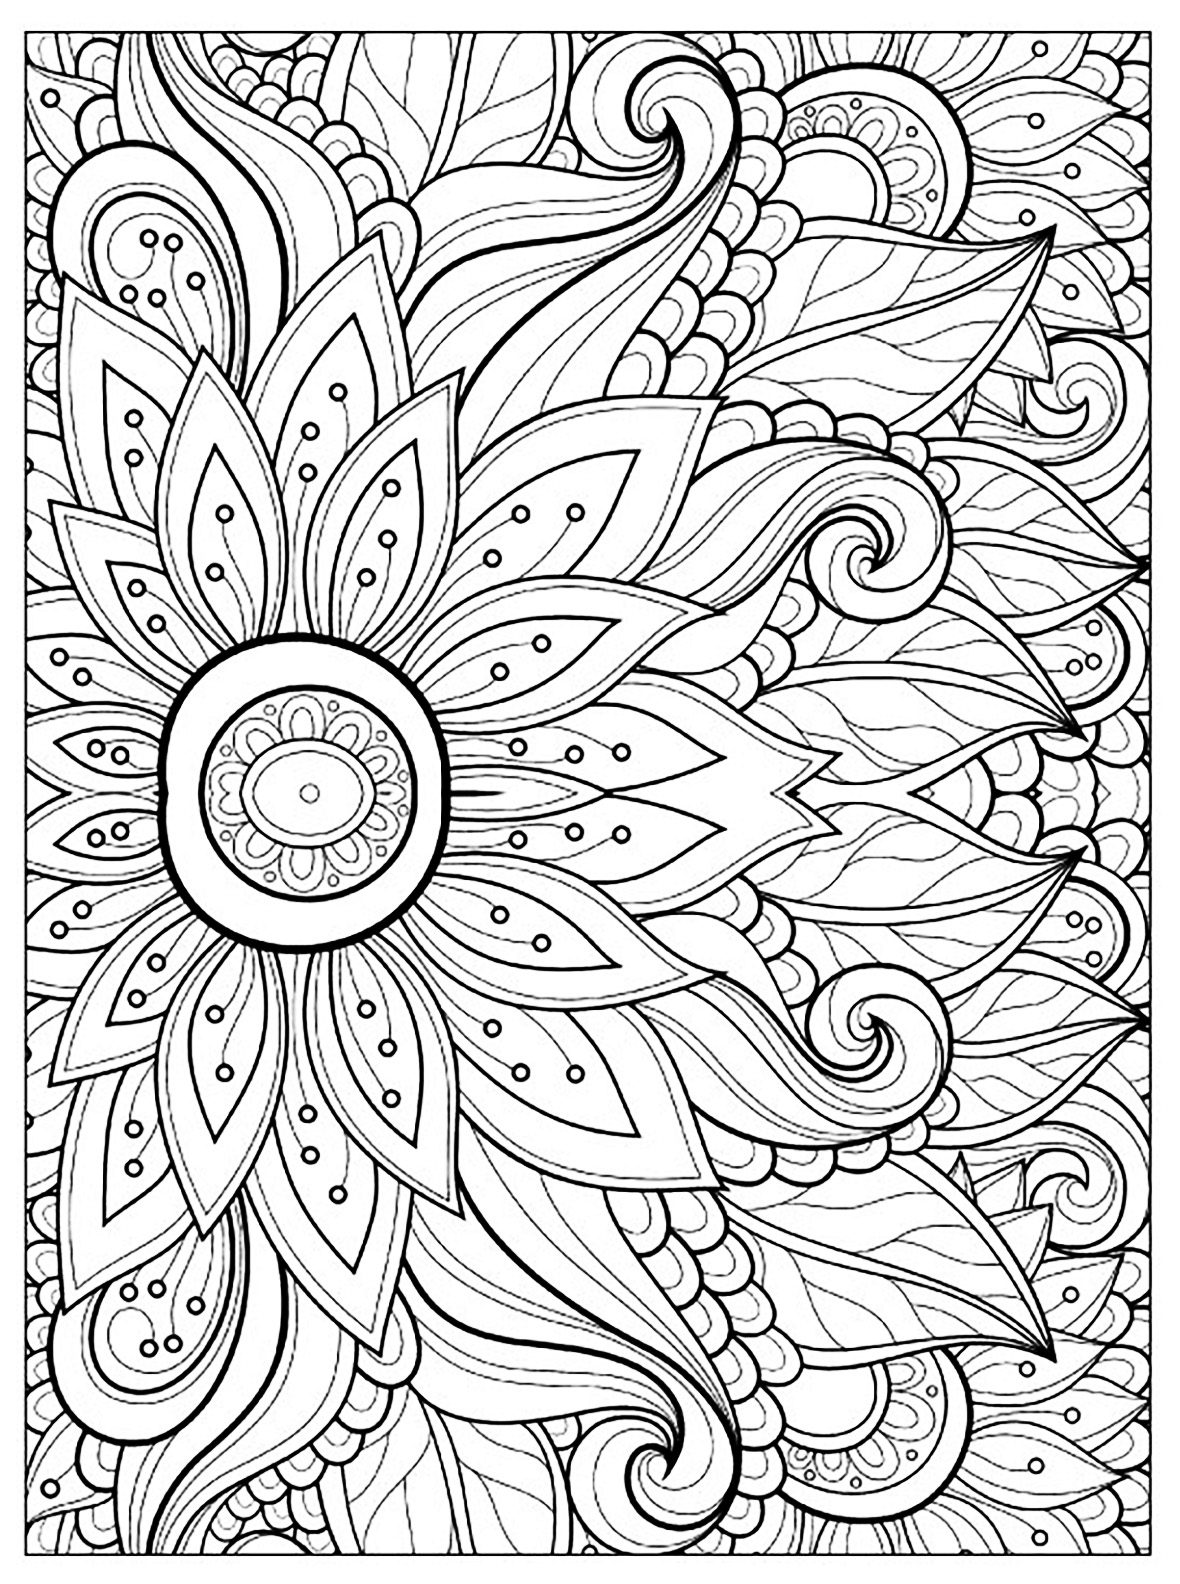 Flower Coloring Pages For Adults at GetDrawings | Free ...